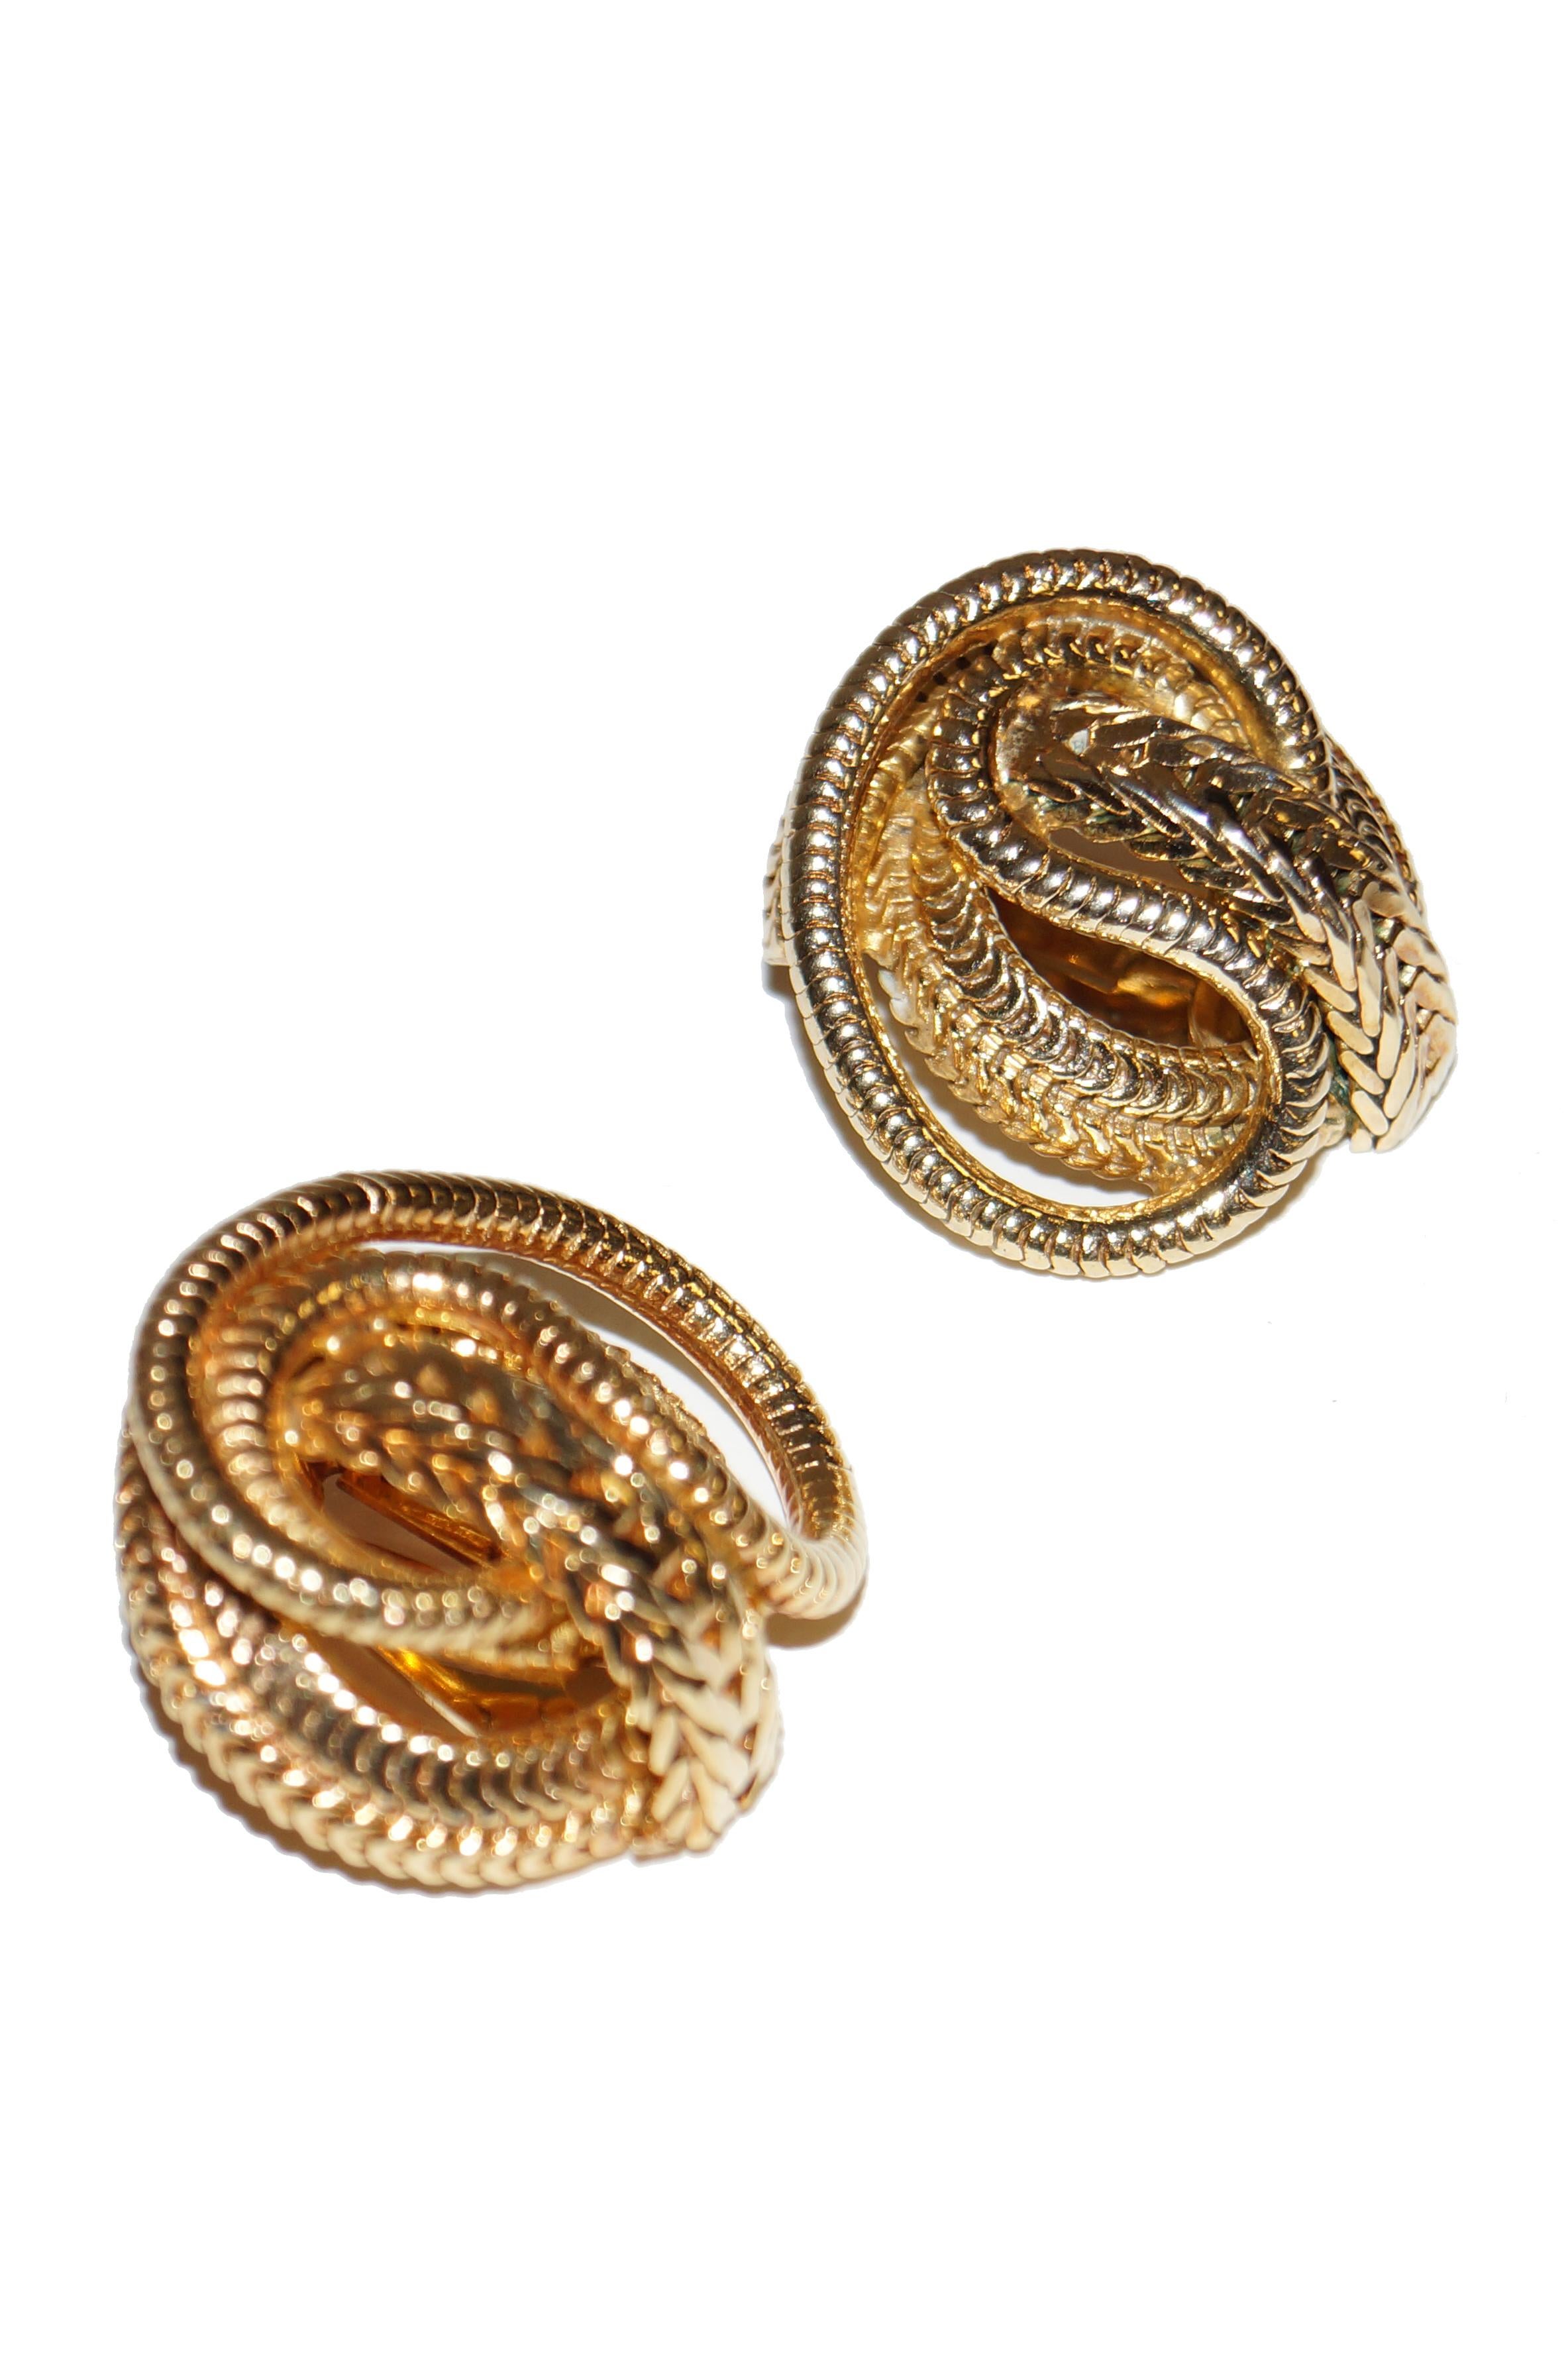 Stunning scintillating gold snake chain earrings by Hattie Carnegie! The earrings feature free swirling gold tone snake chains wrapping underneath a larger chain with chevron - like marks. Simple but stunning! 

Hattie Carnegie was born Henrietta